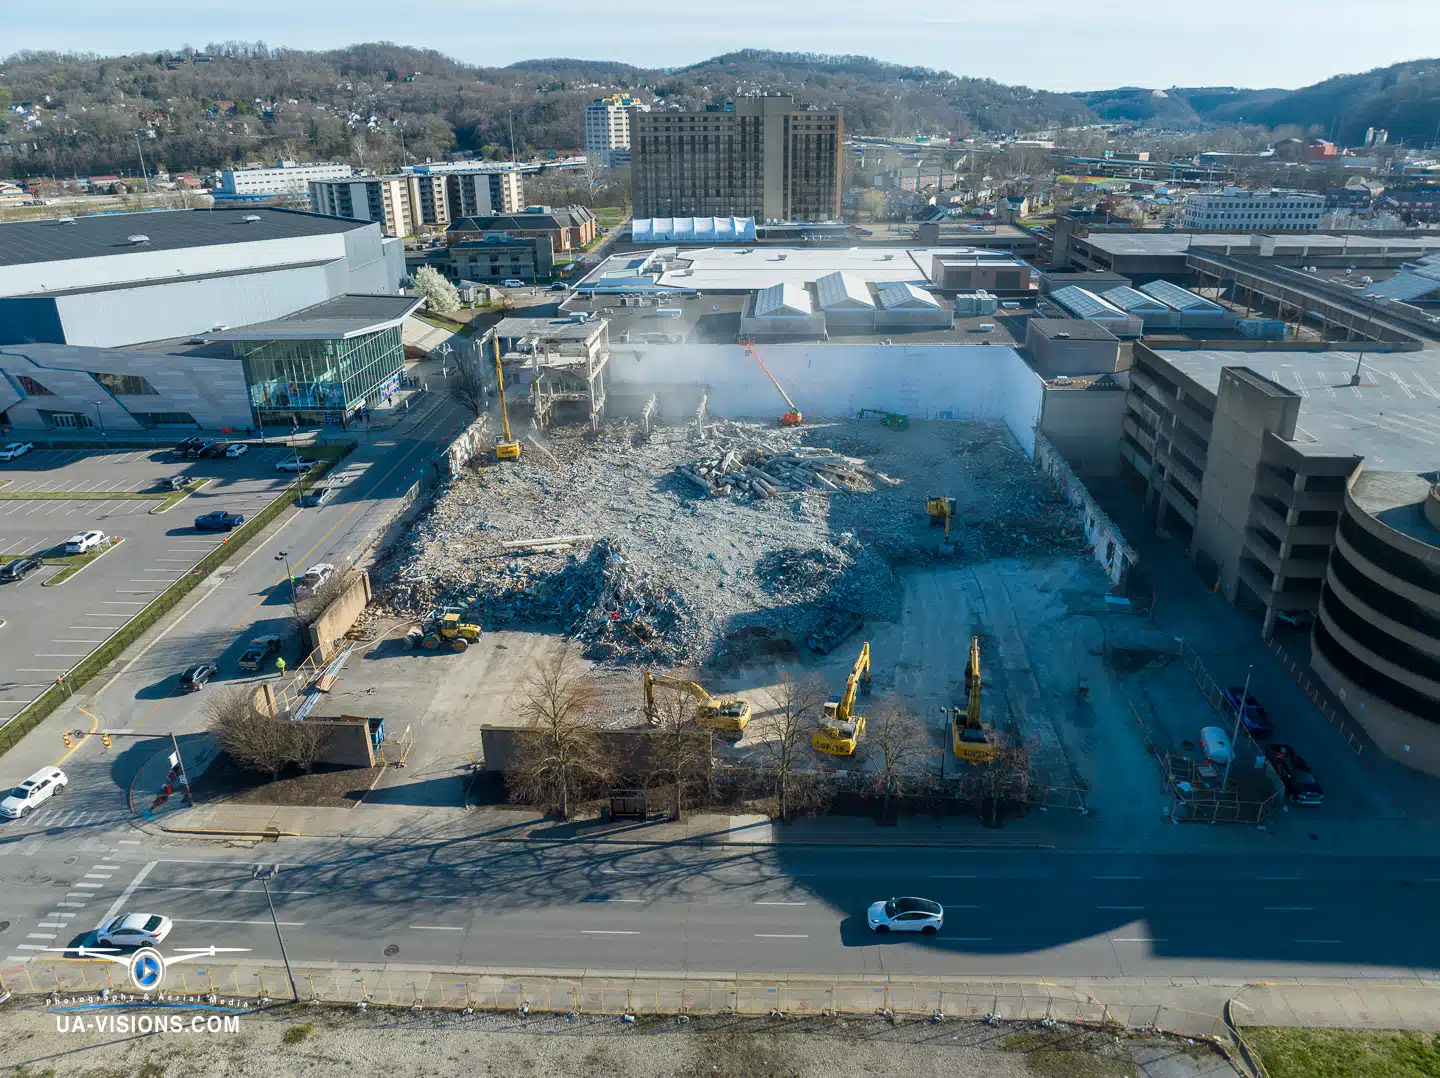 Aerial view of a demolition progression project of the Sears building at the Charleston Town Center Mall captured by UA-Visions